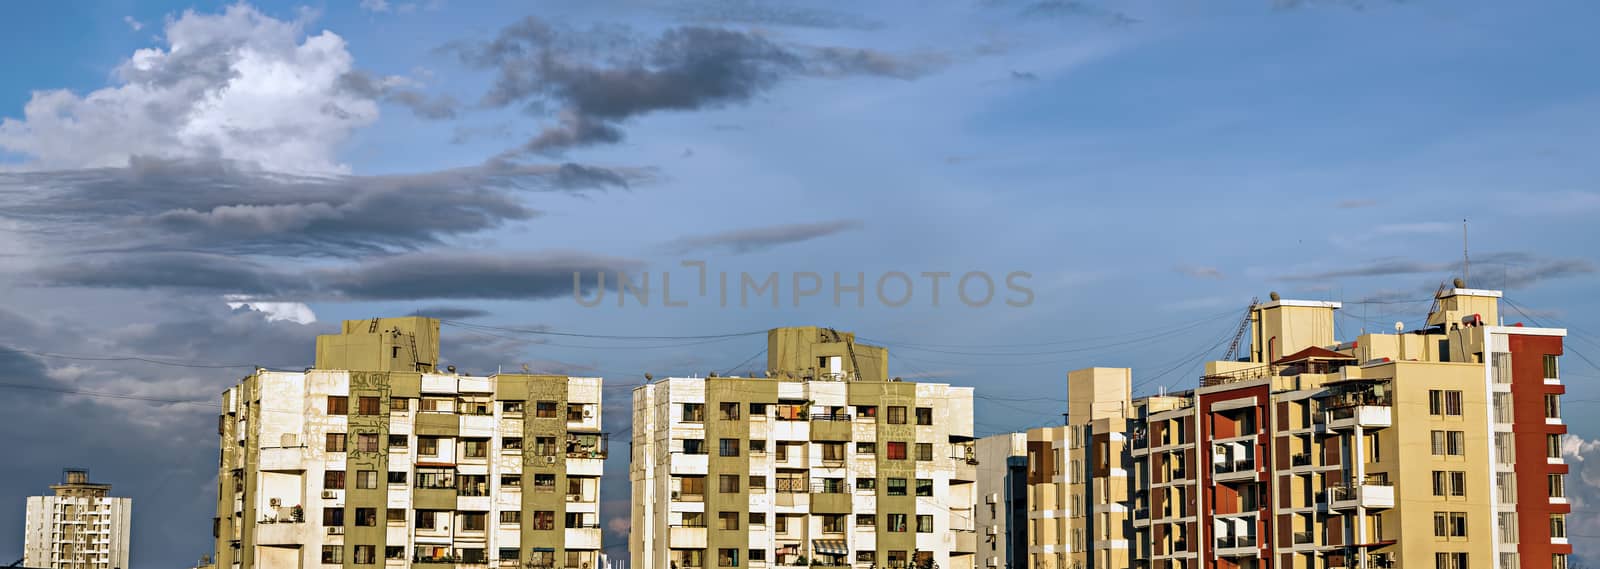 Panorama image of tall buildings in city with beautiful blue monsoon clouds. by lalam